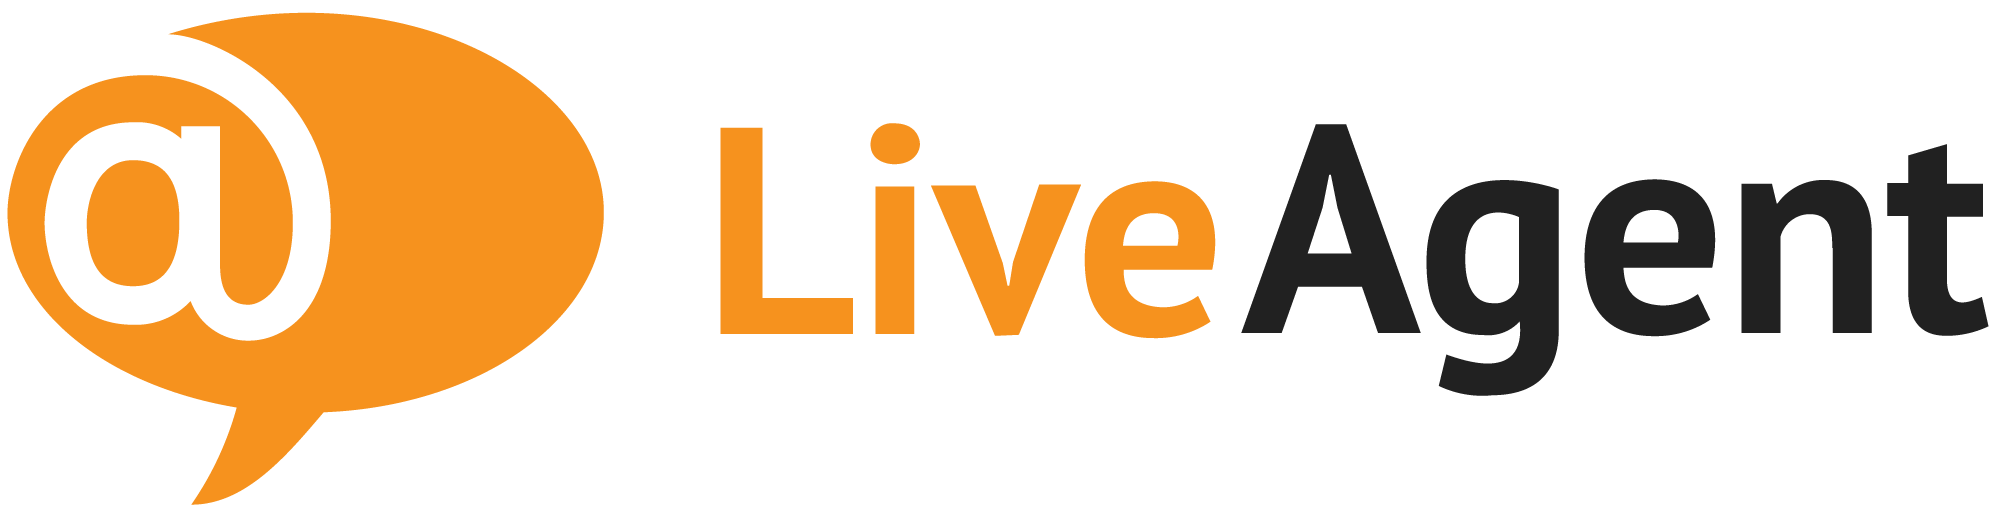 Live Agent Coupon Code